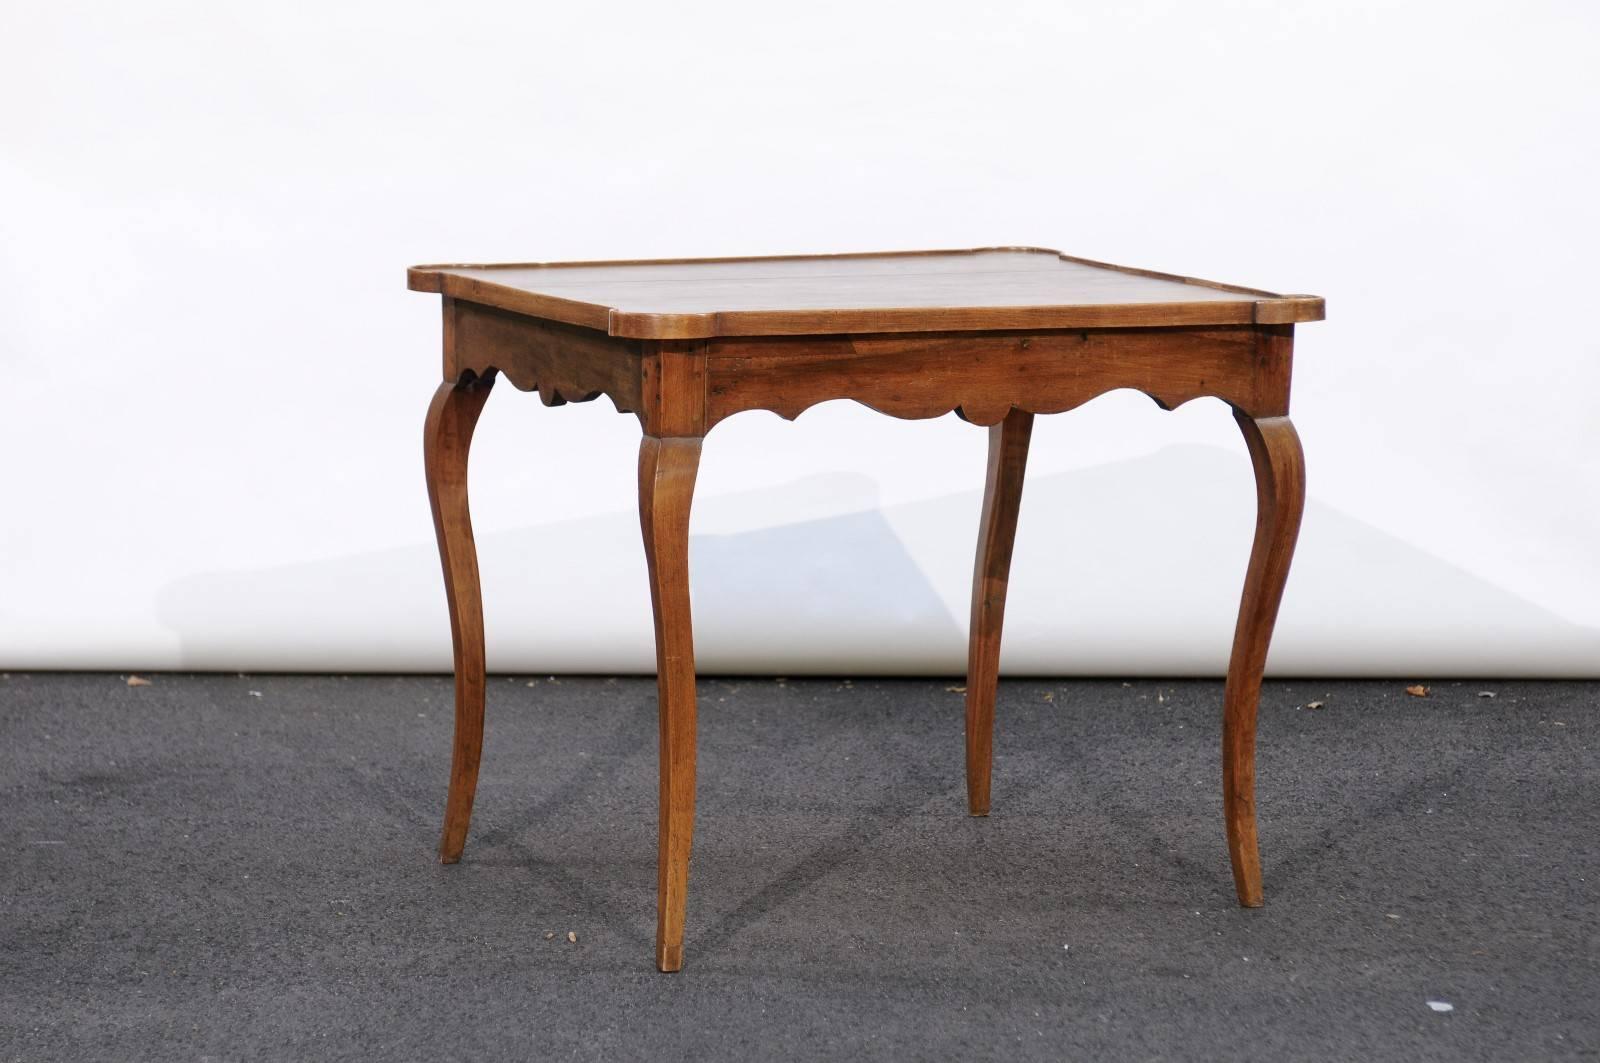 This French Louis XV style walnut game table from the late 19th century features a rectangular top with rounded corners over a beautifully scalloped apron, raised on four slender cabriole legs. A rich walnut patina combined with graceful curvy lines